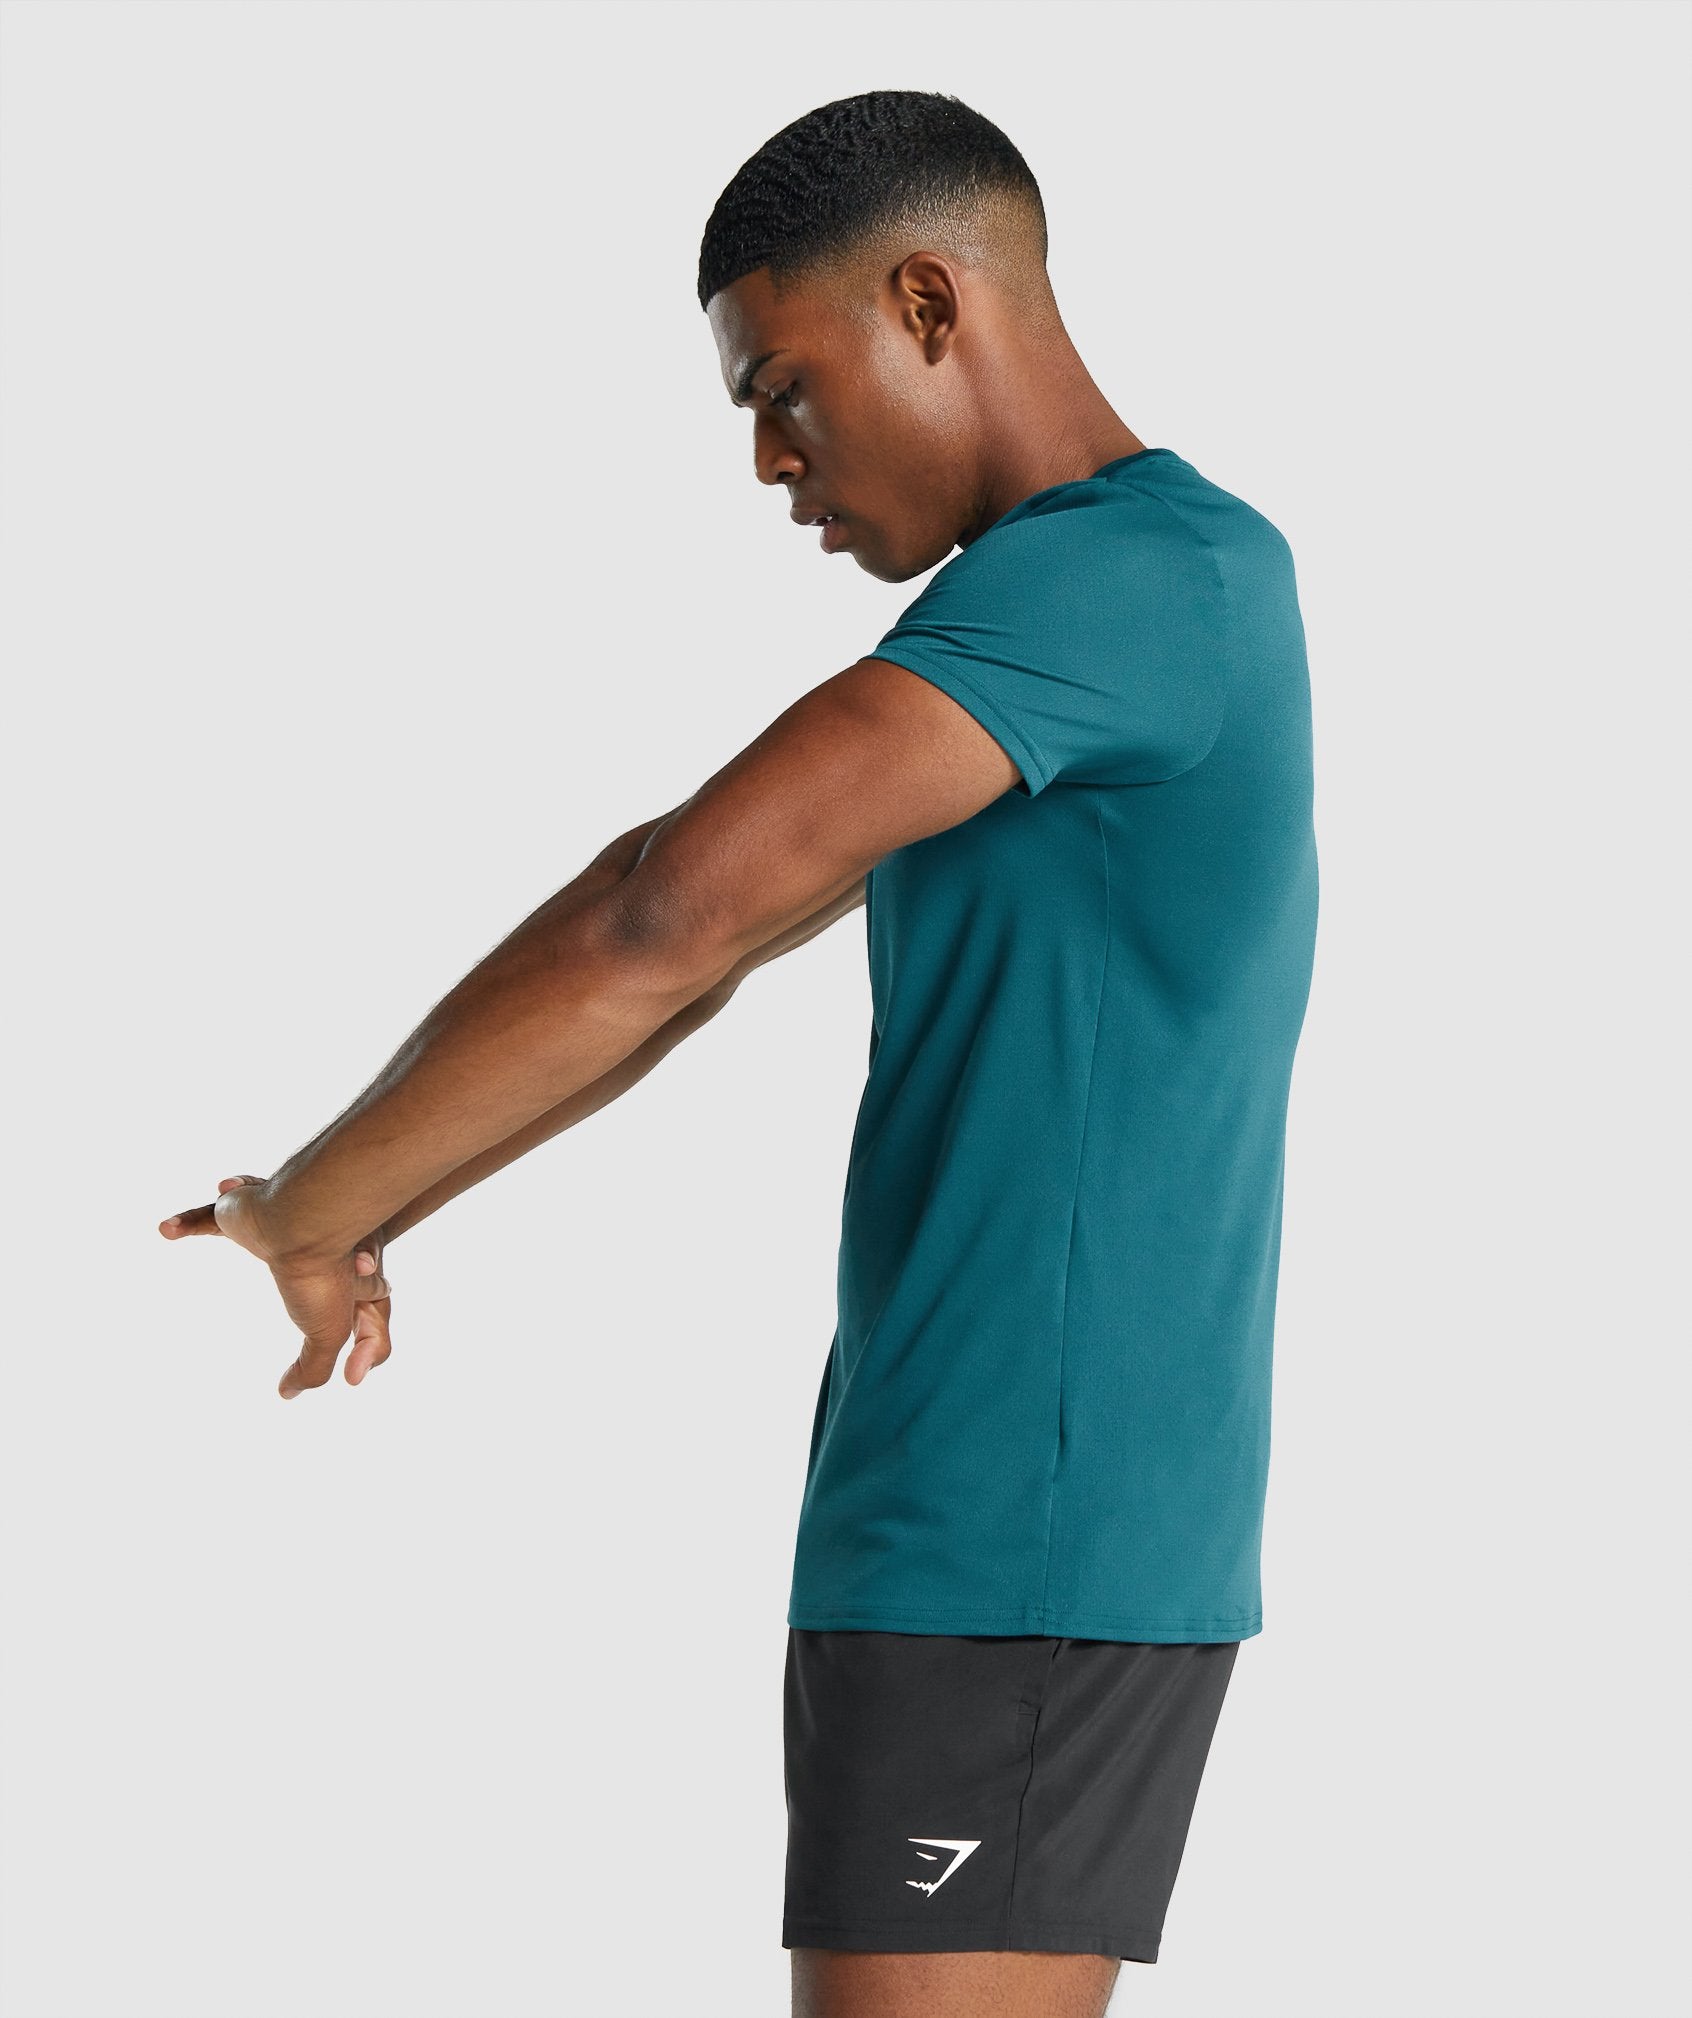 Arrival Graphic T-Shirt in Teal - view 3